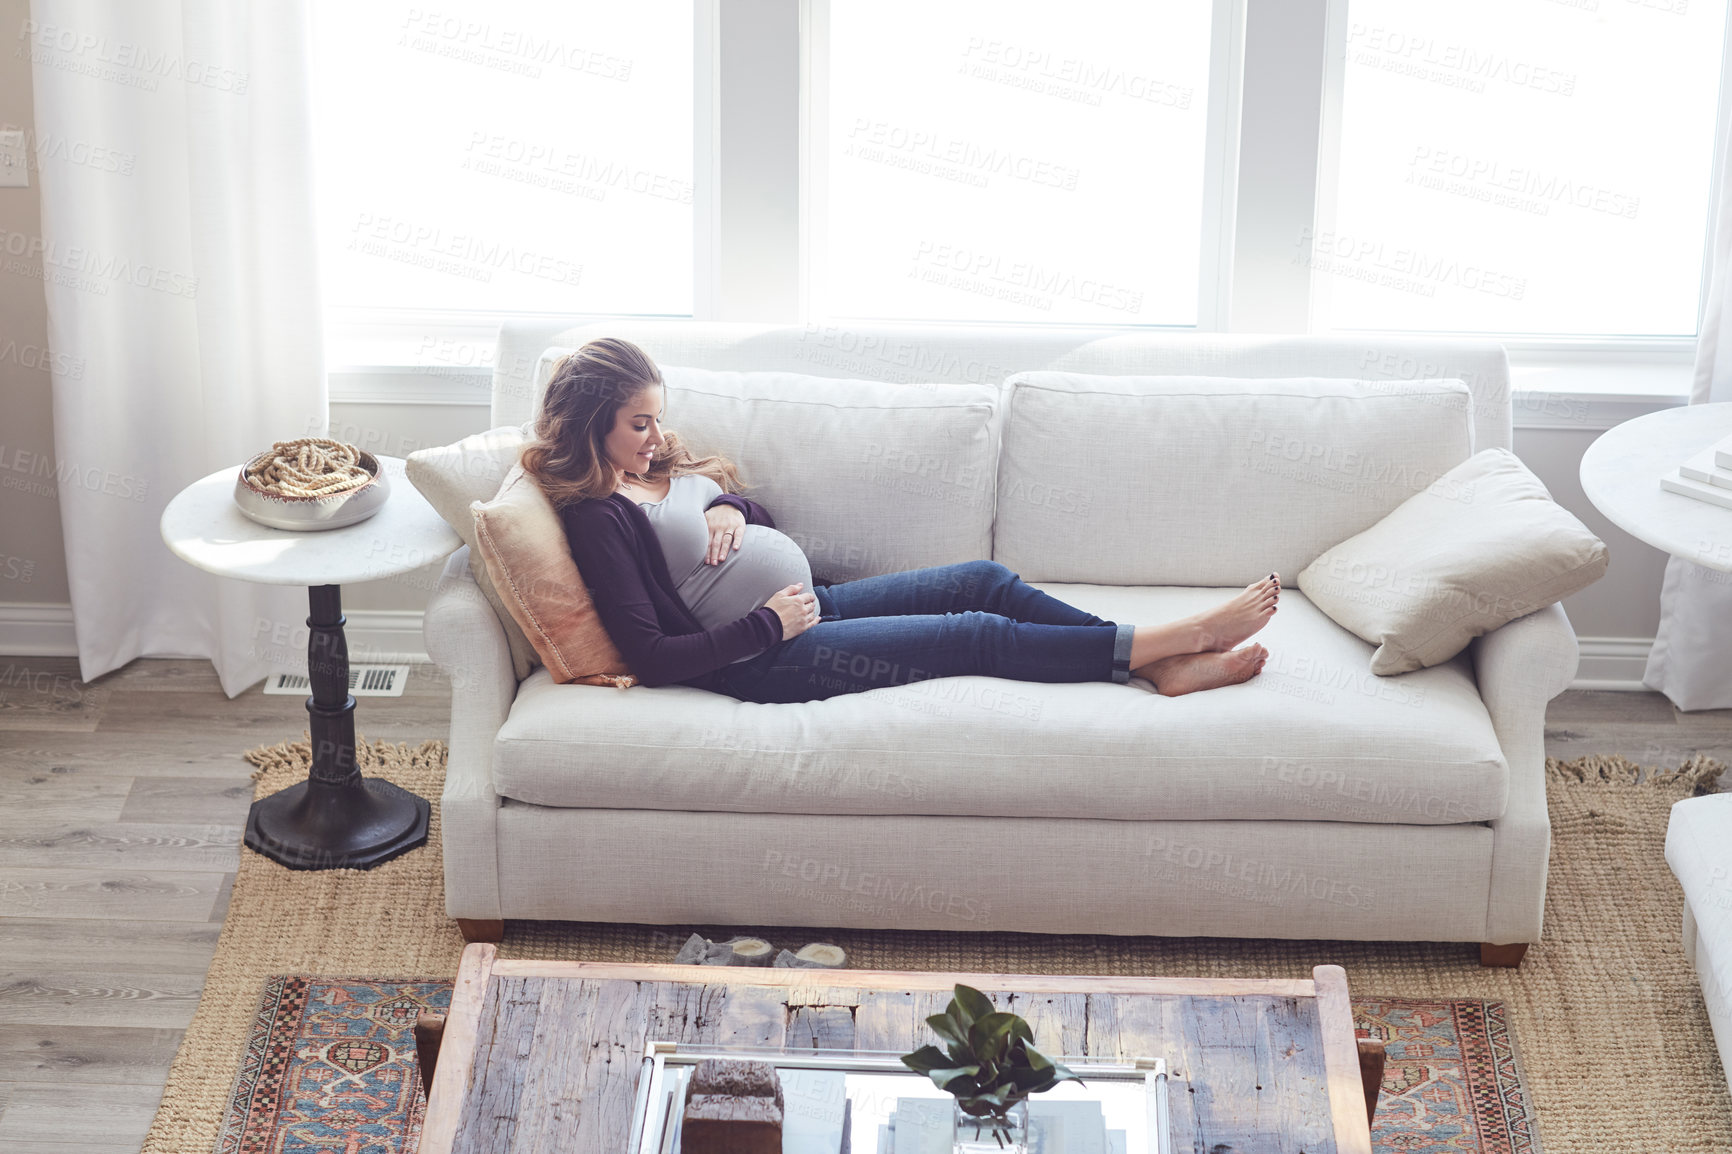 Buy stock photo Full length shot of an attractive young pregnant woman relaxing on the sofa at home